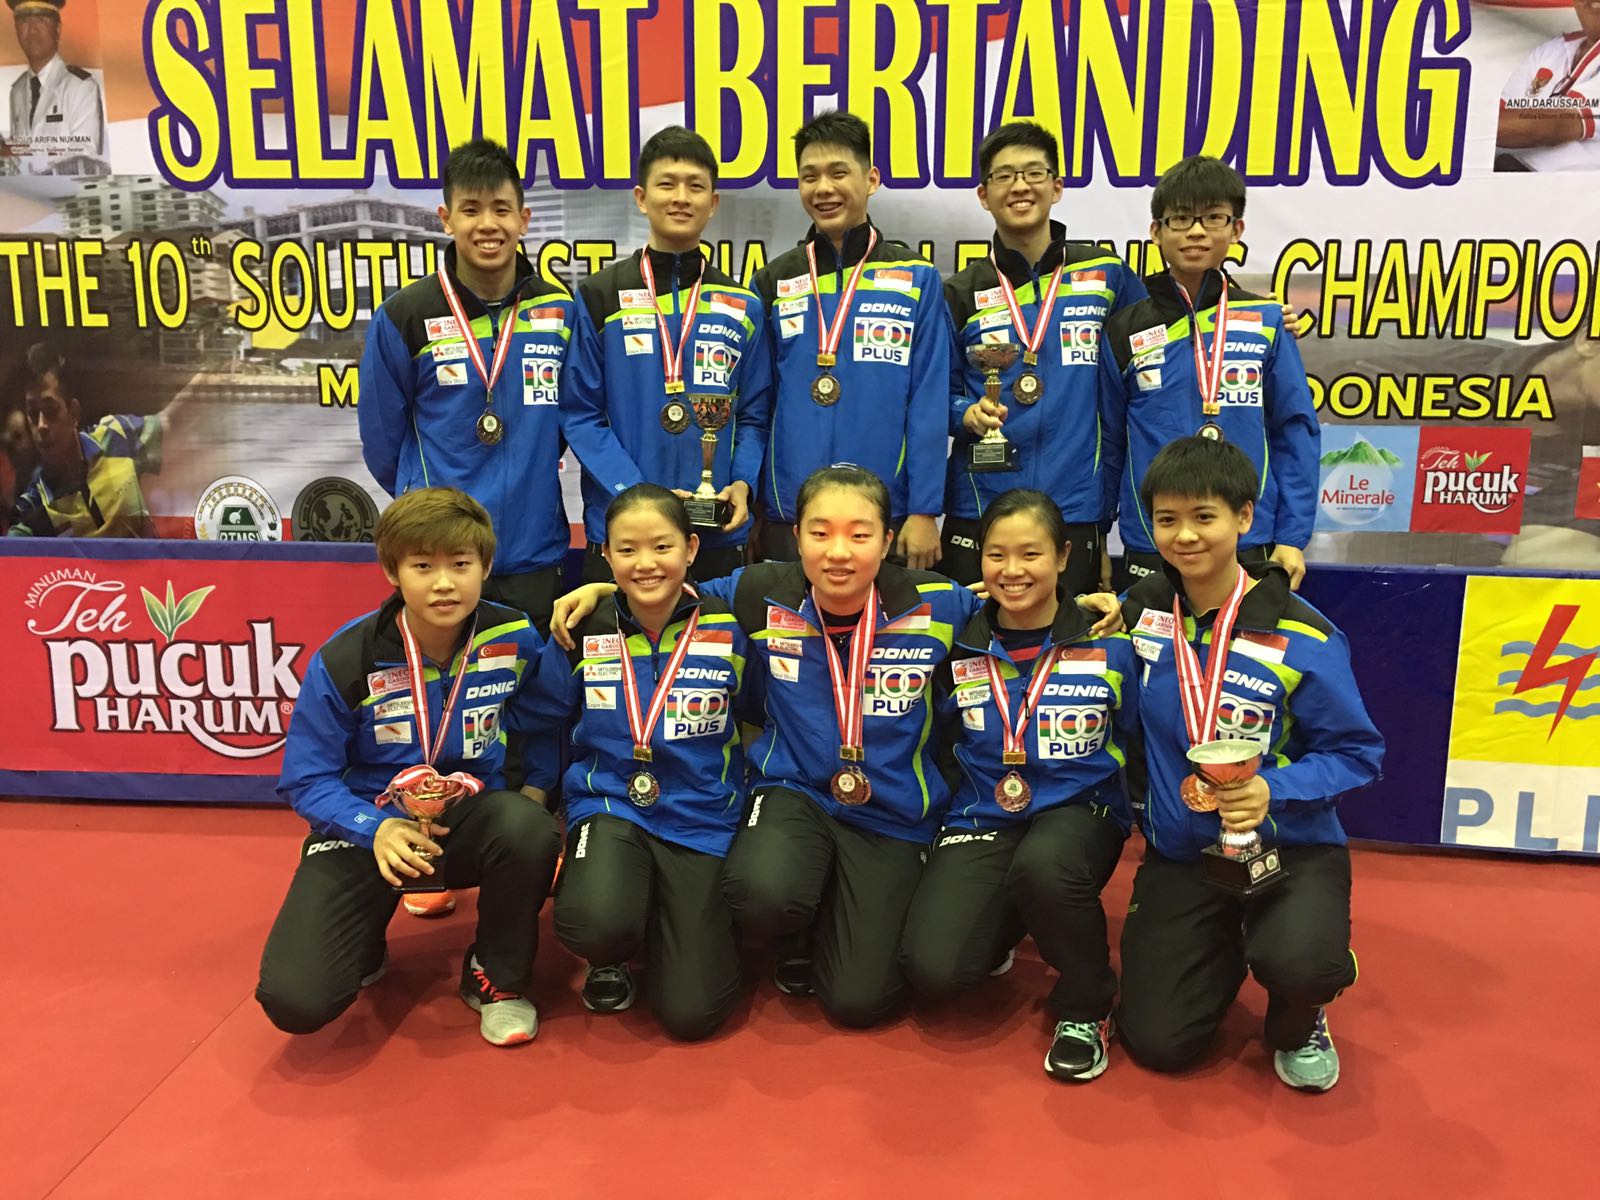 Singapore’s next generation of young talents scored a total of 9 medals at the 10th South East Asian (SEA) Table Tennis Championships 2016